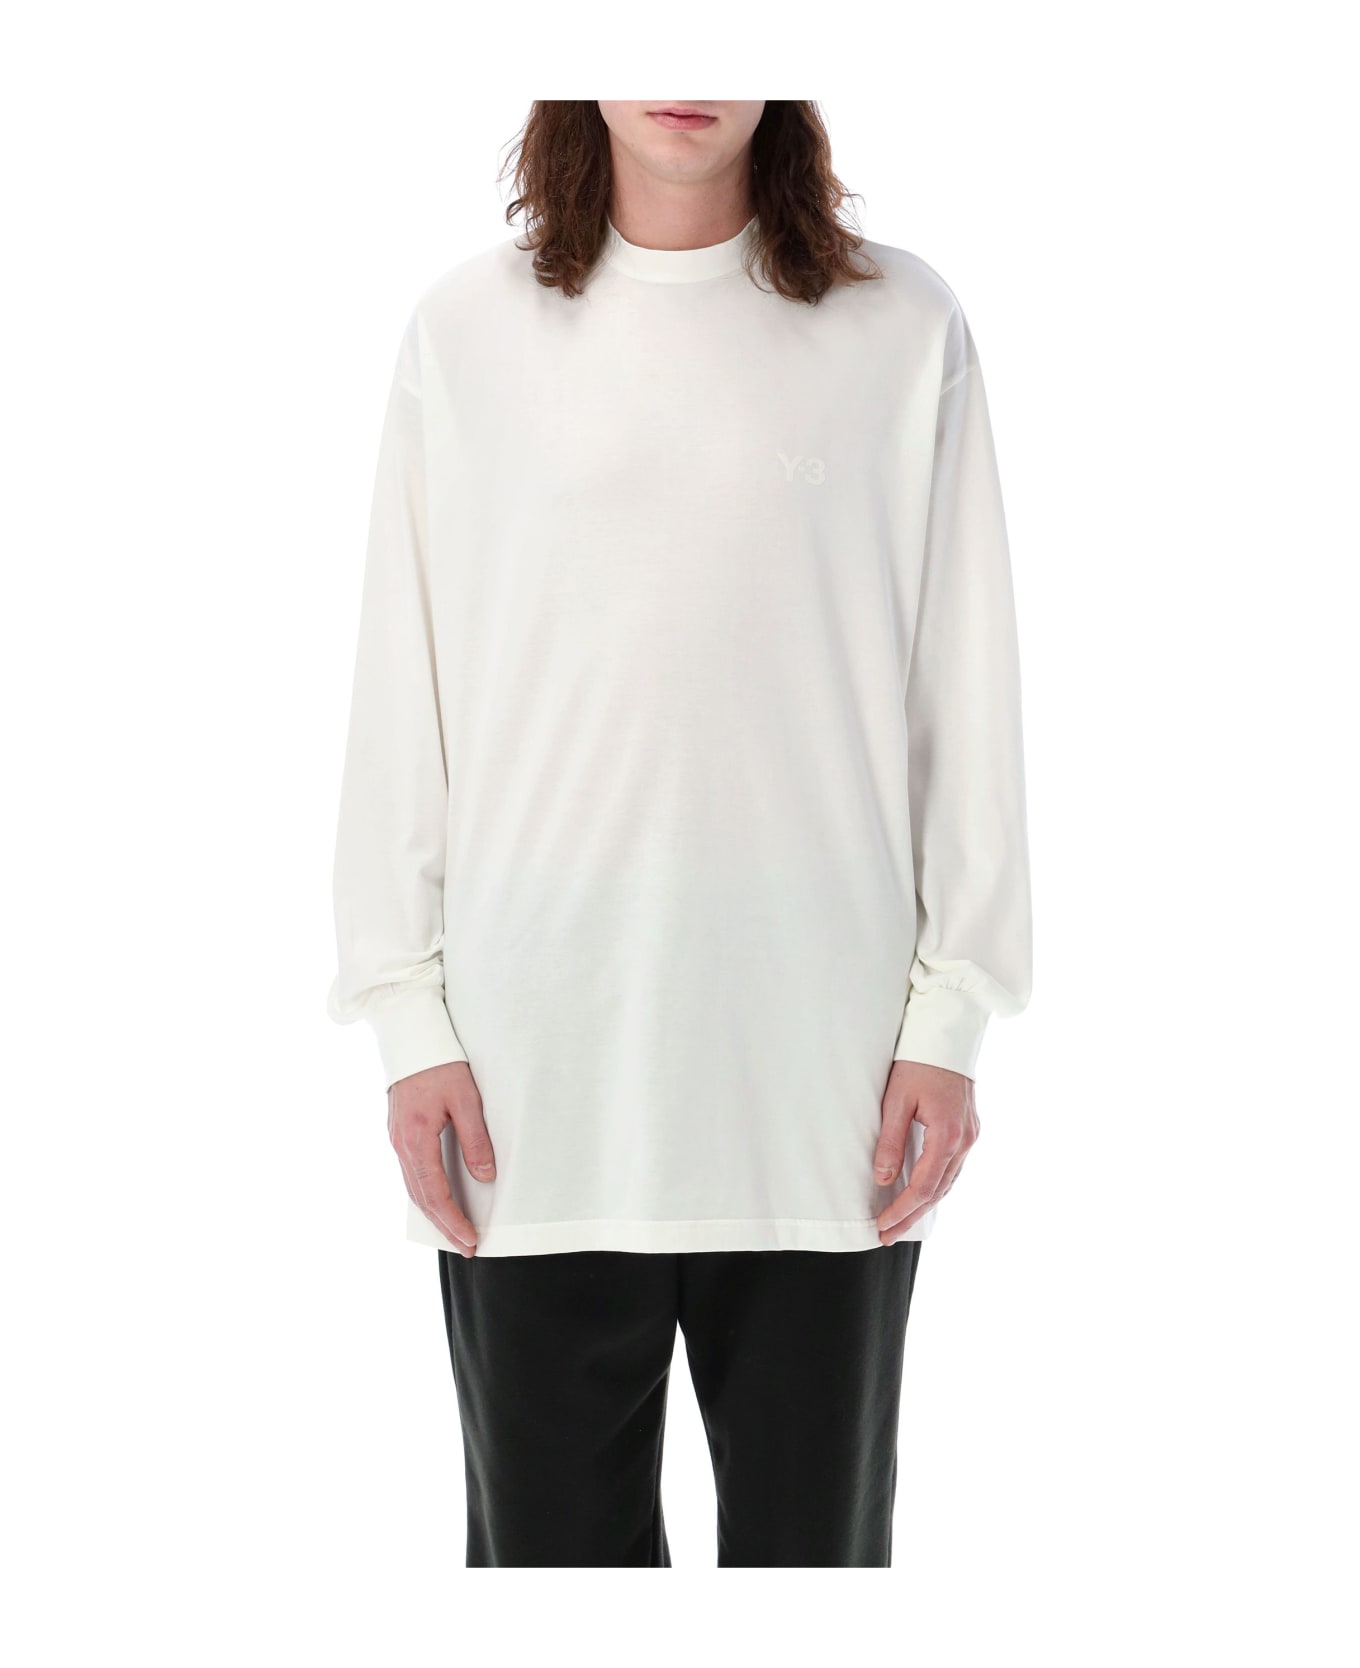 Y-3 Mock Neck Long Sleeves T-shirt - WHITE